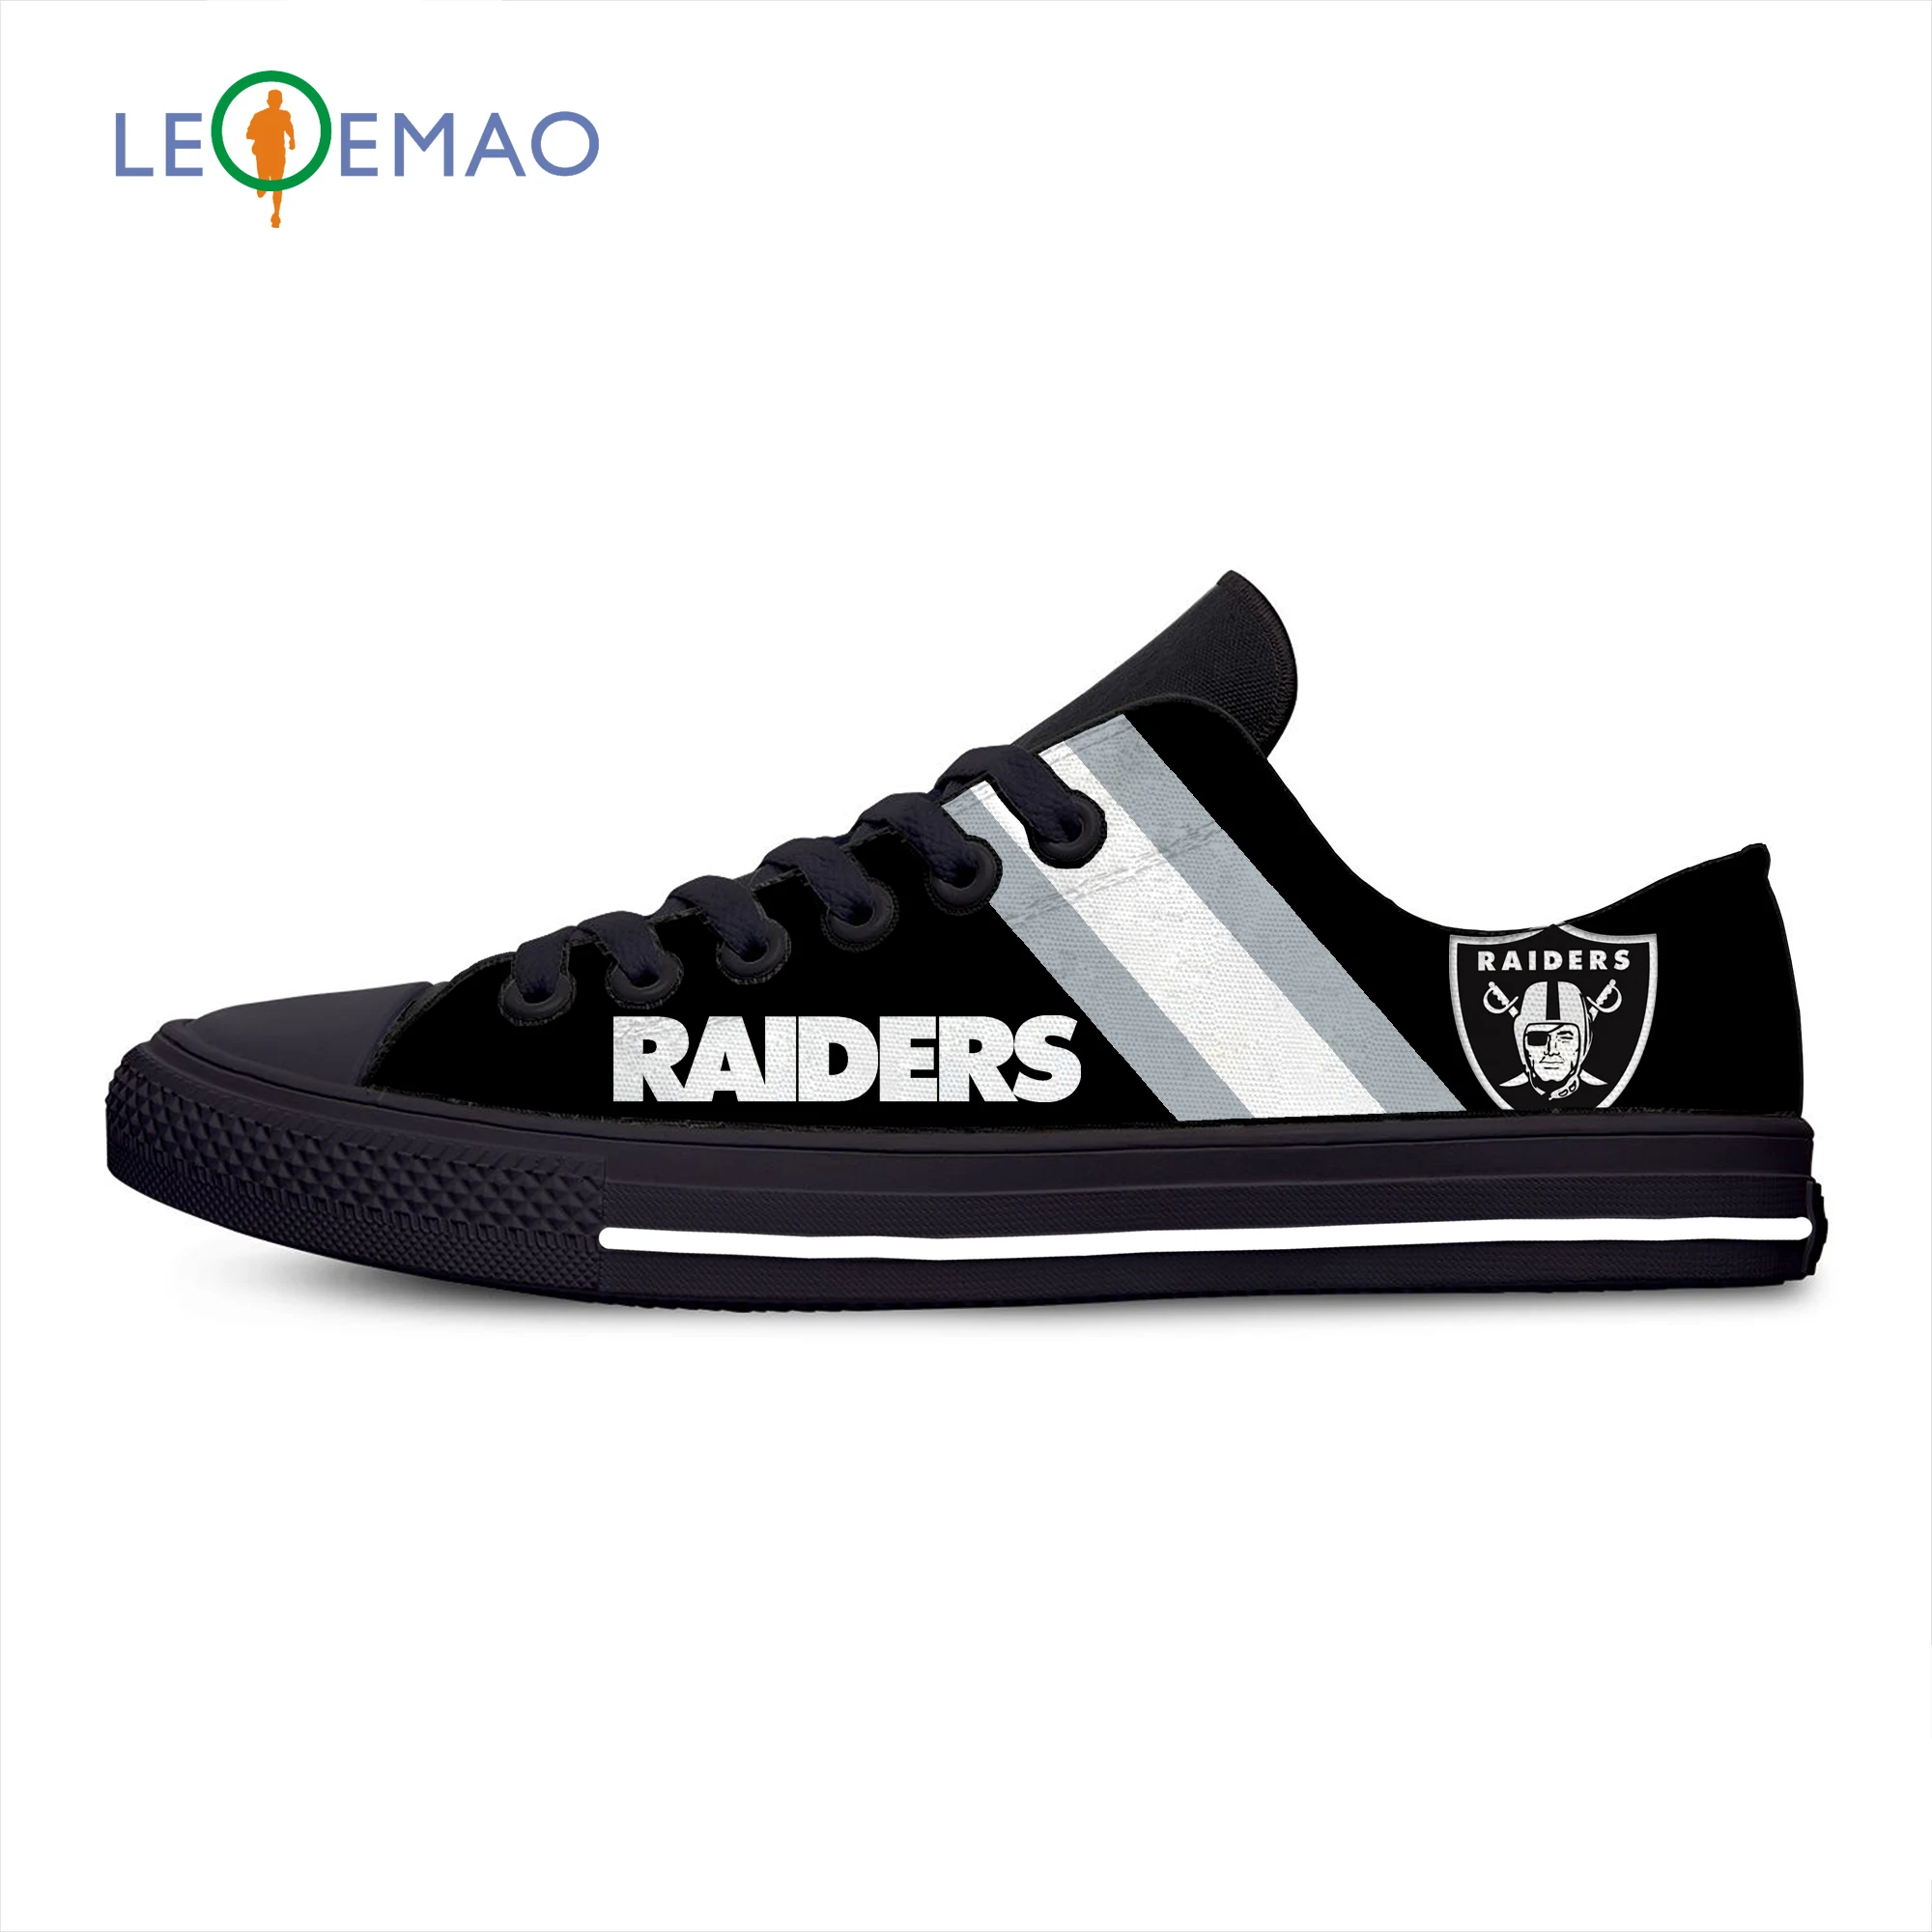 

2020 miami Men's Raiders 2019 bowl LIV Champions fashion Flat Canvas Breathable Sneakers for Oakland fans gift